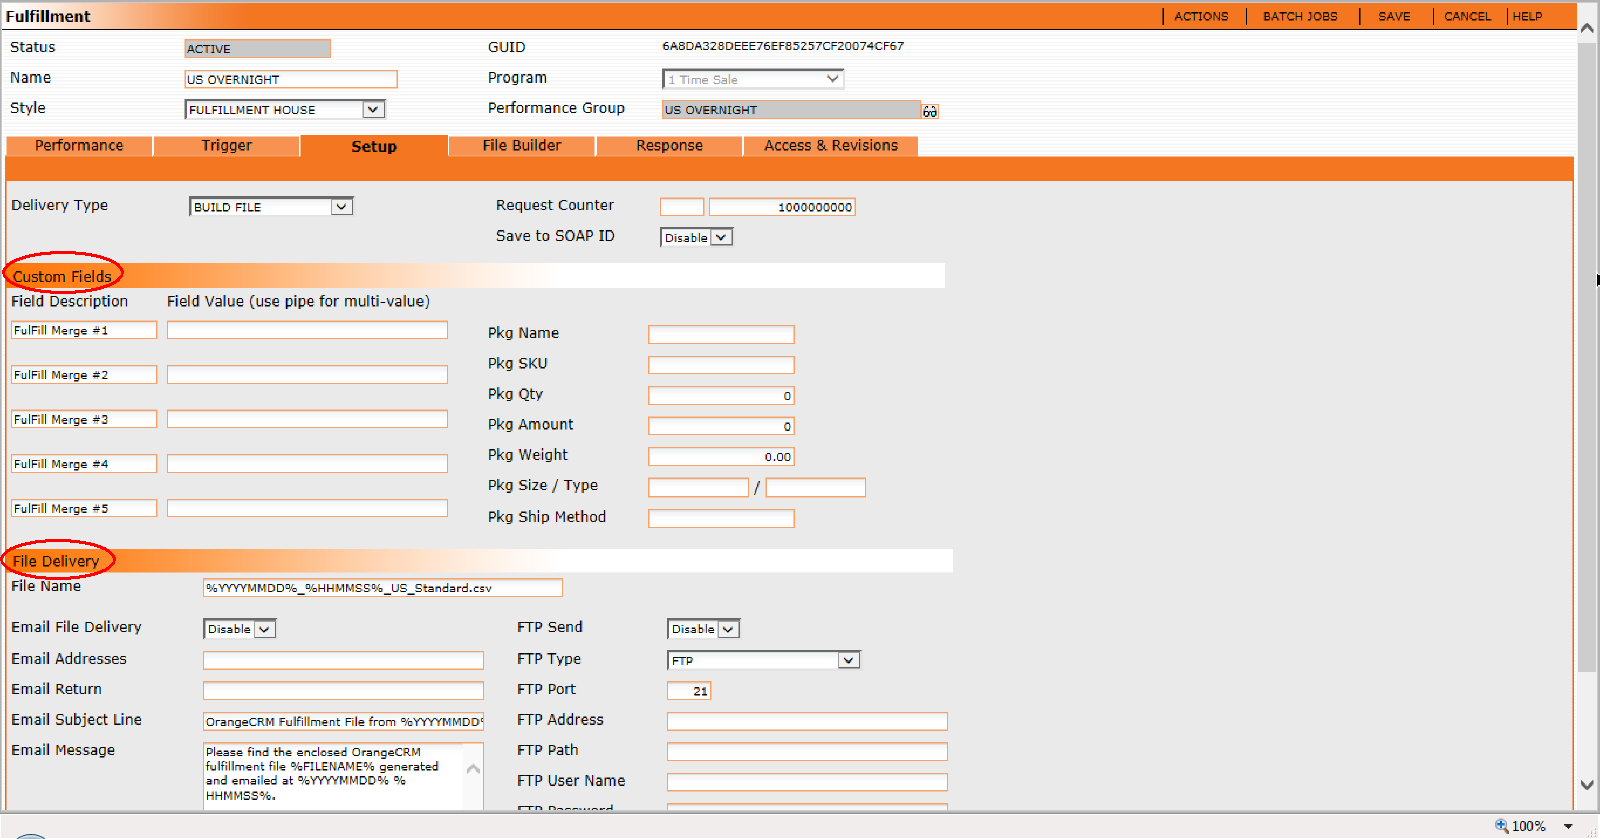 Fulfillment Custom Fields and Delivery Options